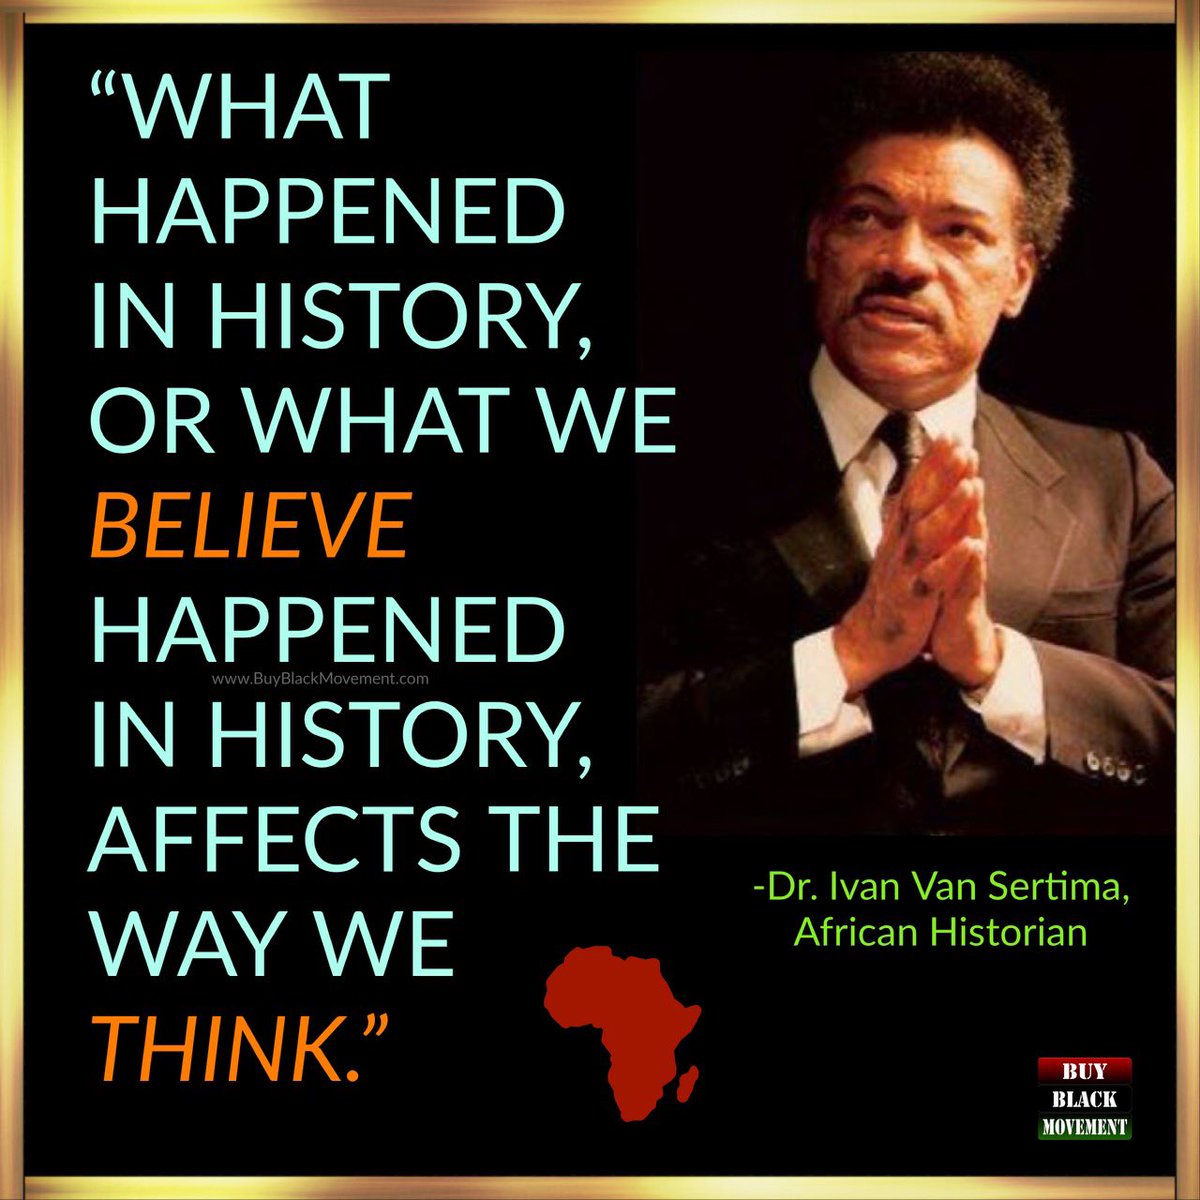 🌟True. Just think about the lie that Africans were swinging on trees, & white missionaries RESCUED us through enslavement! That lie makes you not want to be African. But now we know civilization BEGAN in Africa. And we think better of ourselves. ❤️🖤💚BuyBlackMovement.com